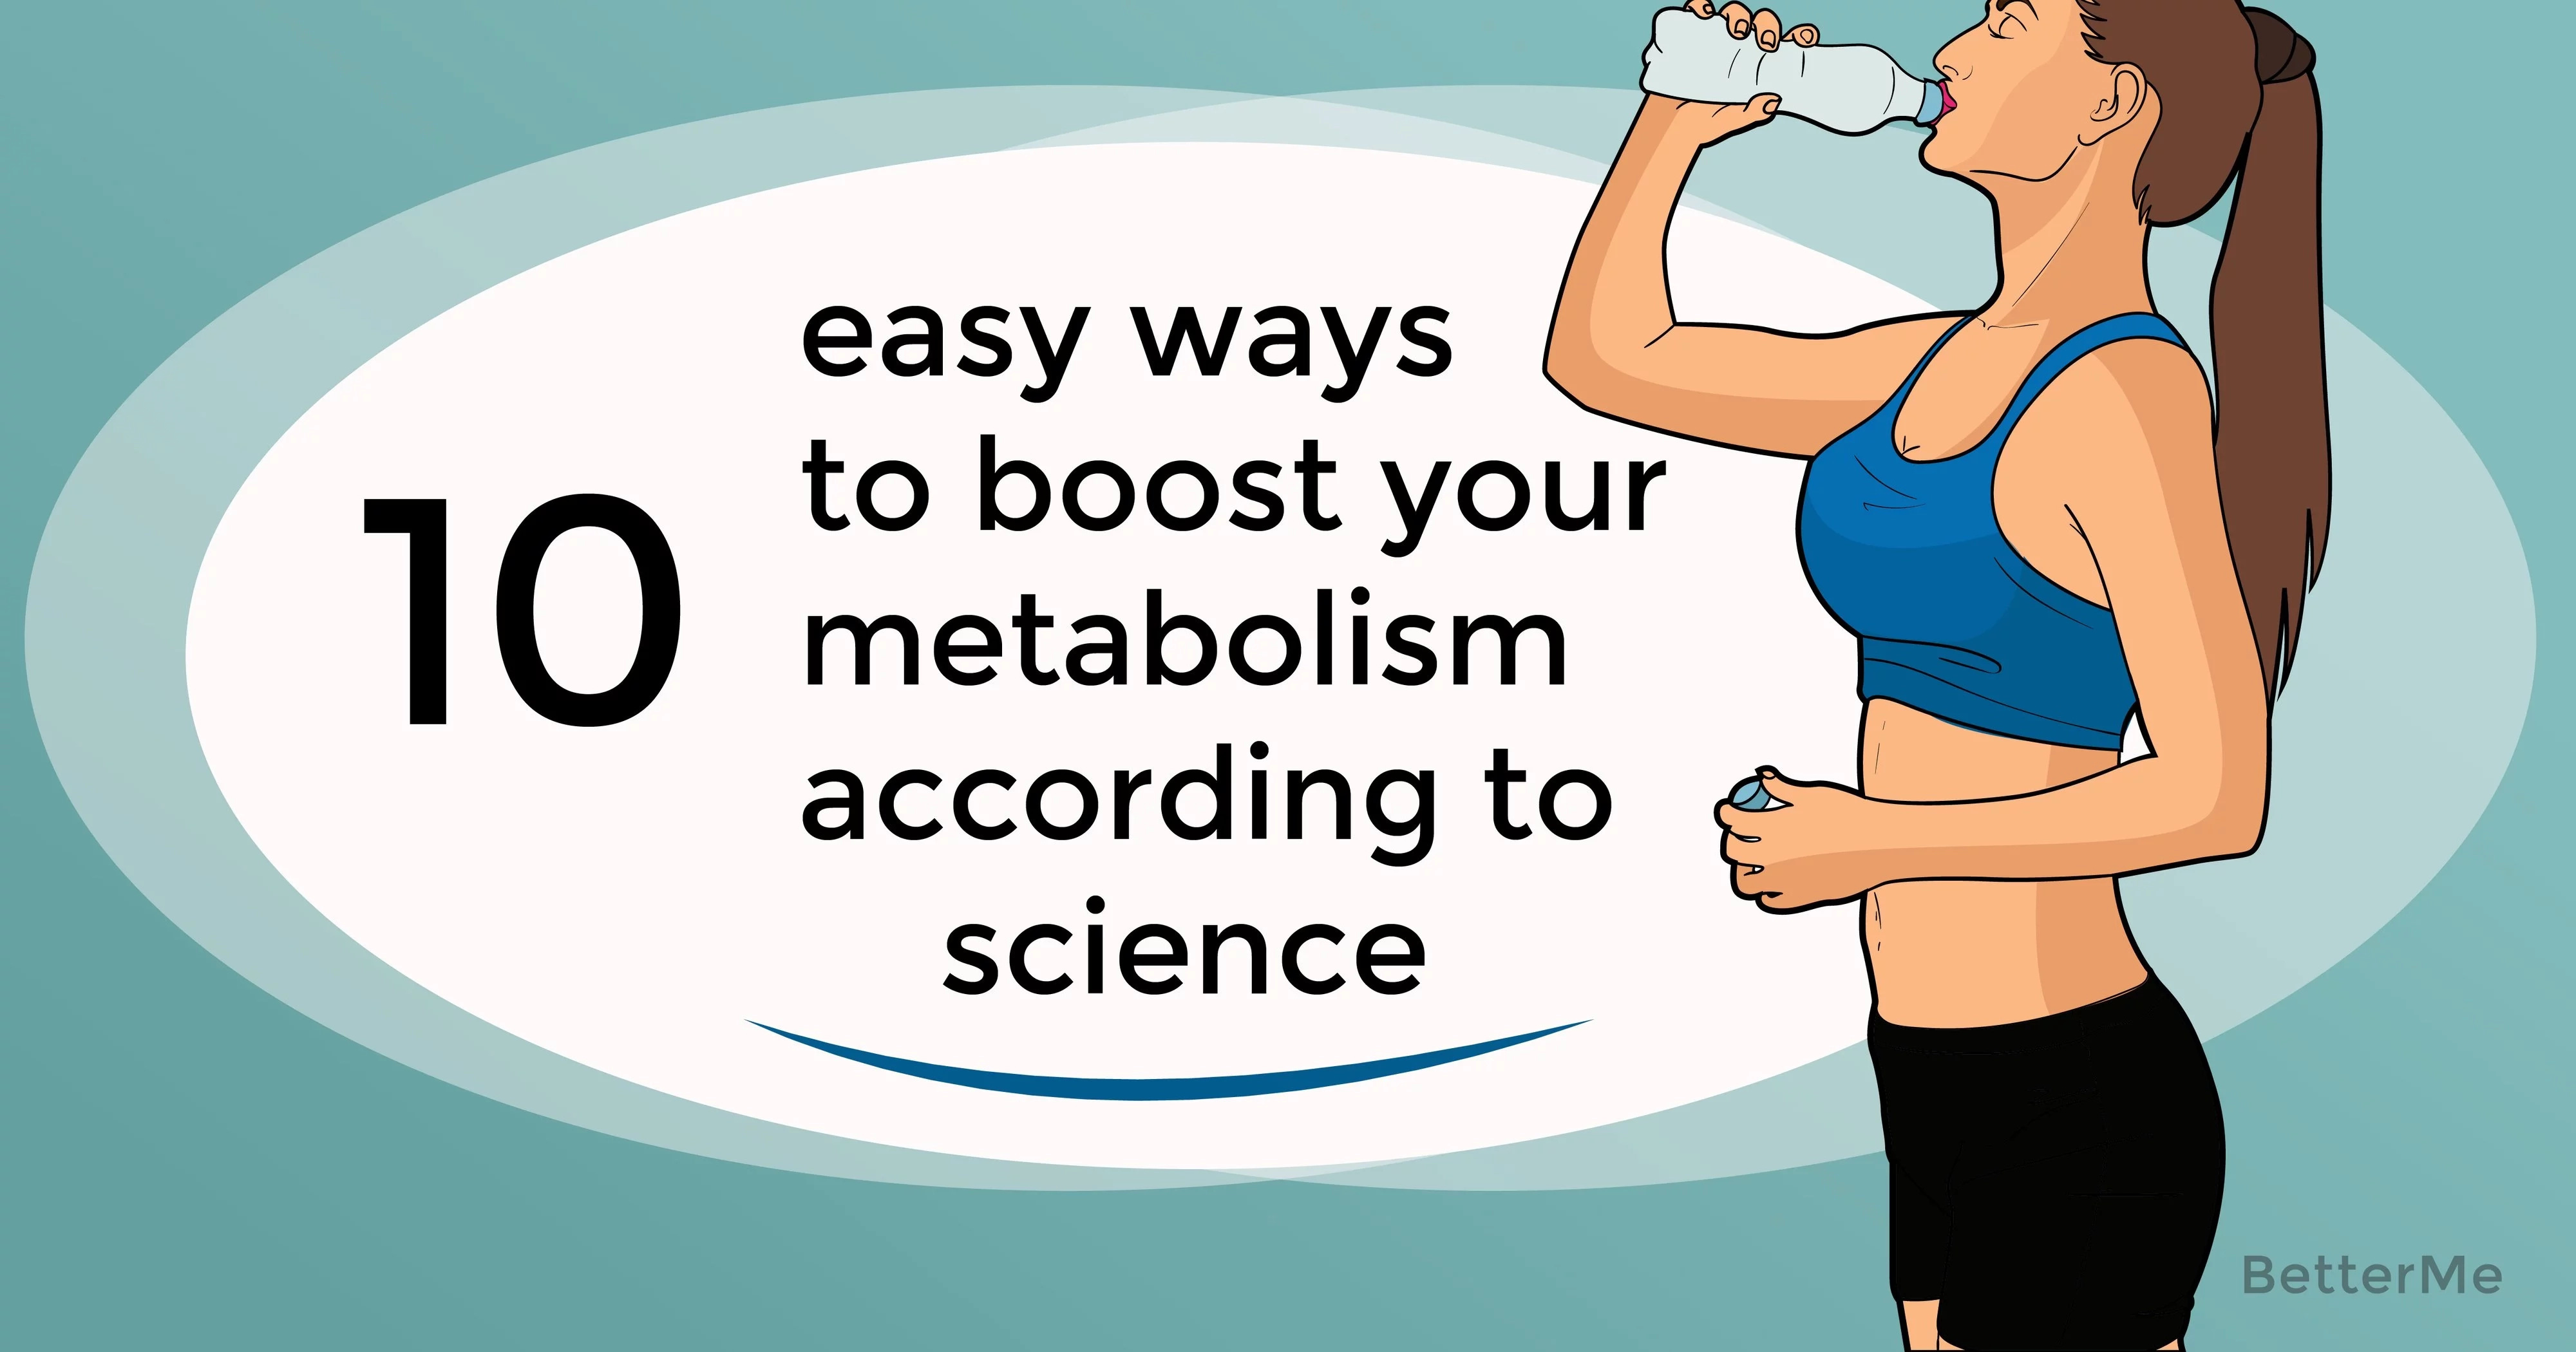 10 easy ways to boost your metabolism according to science